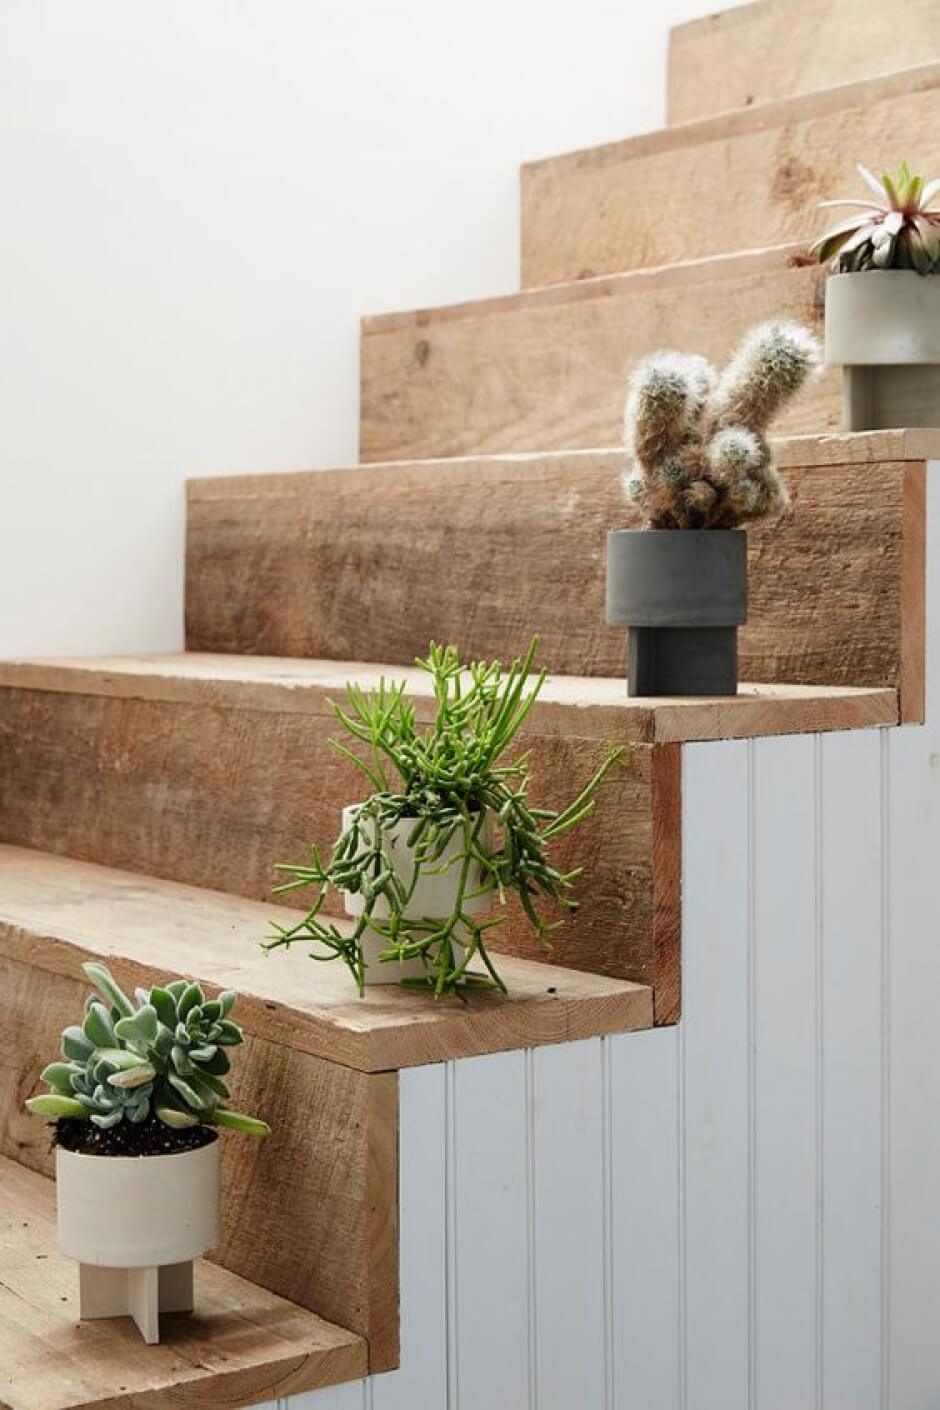 Alternative To Railings With Potted Plants